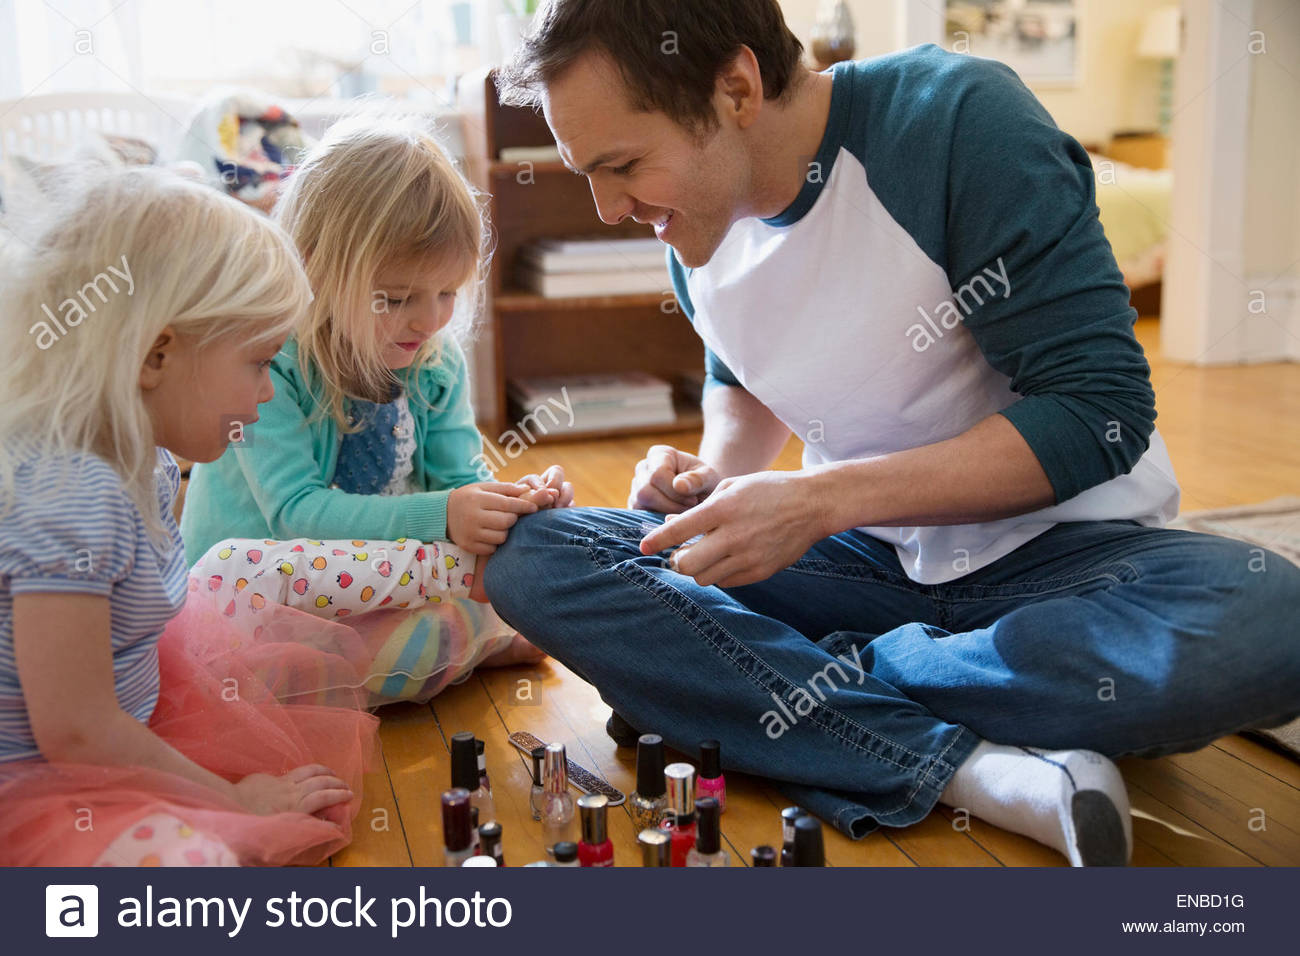 Father painting daughter fingers with fingernail polish Stock Photo